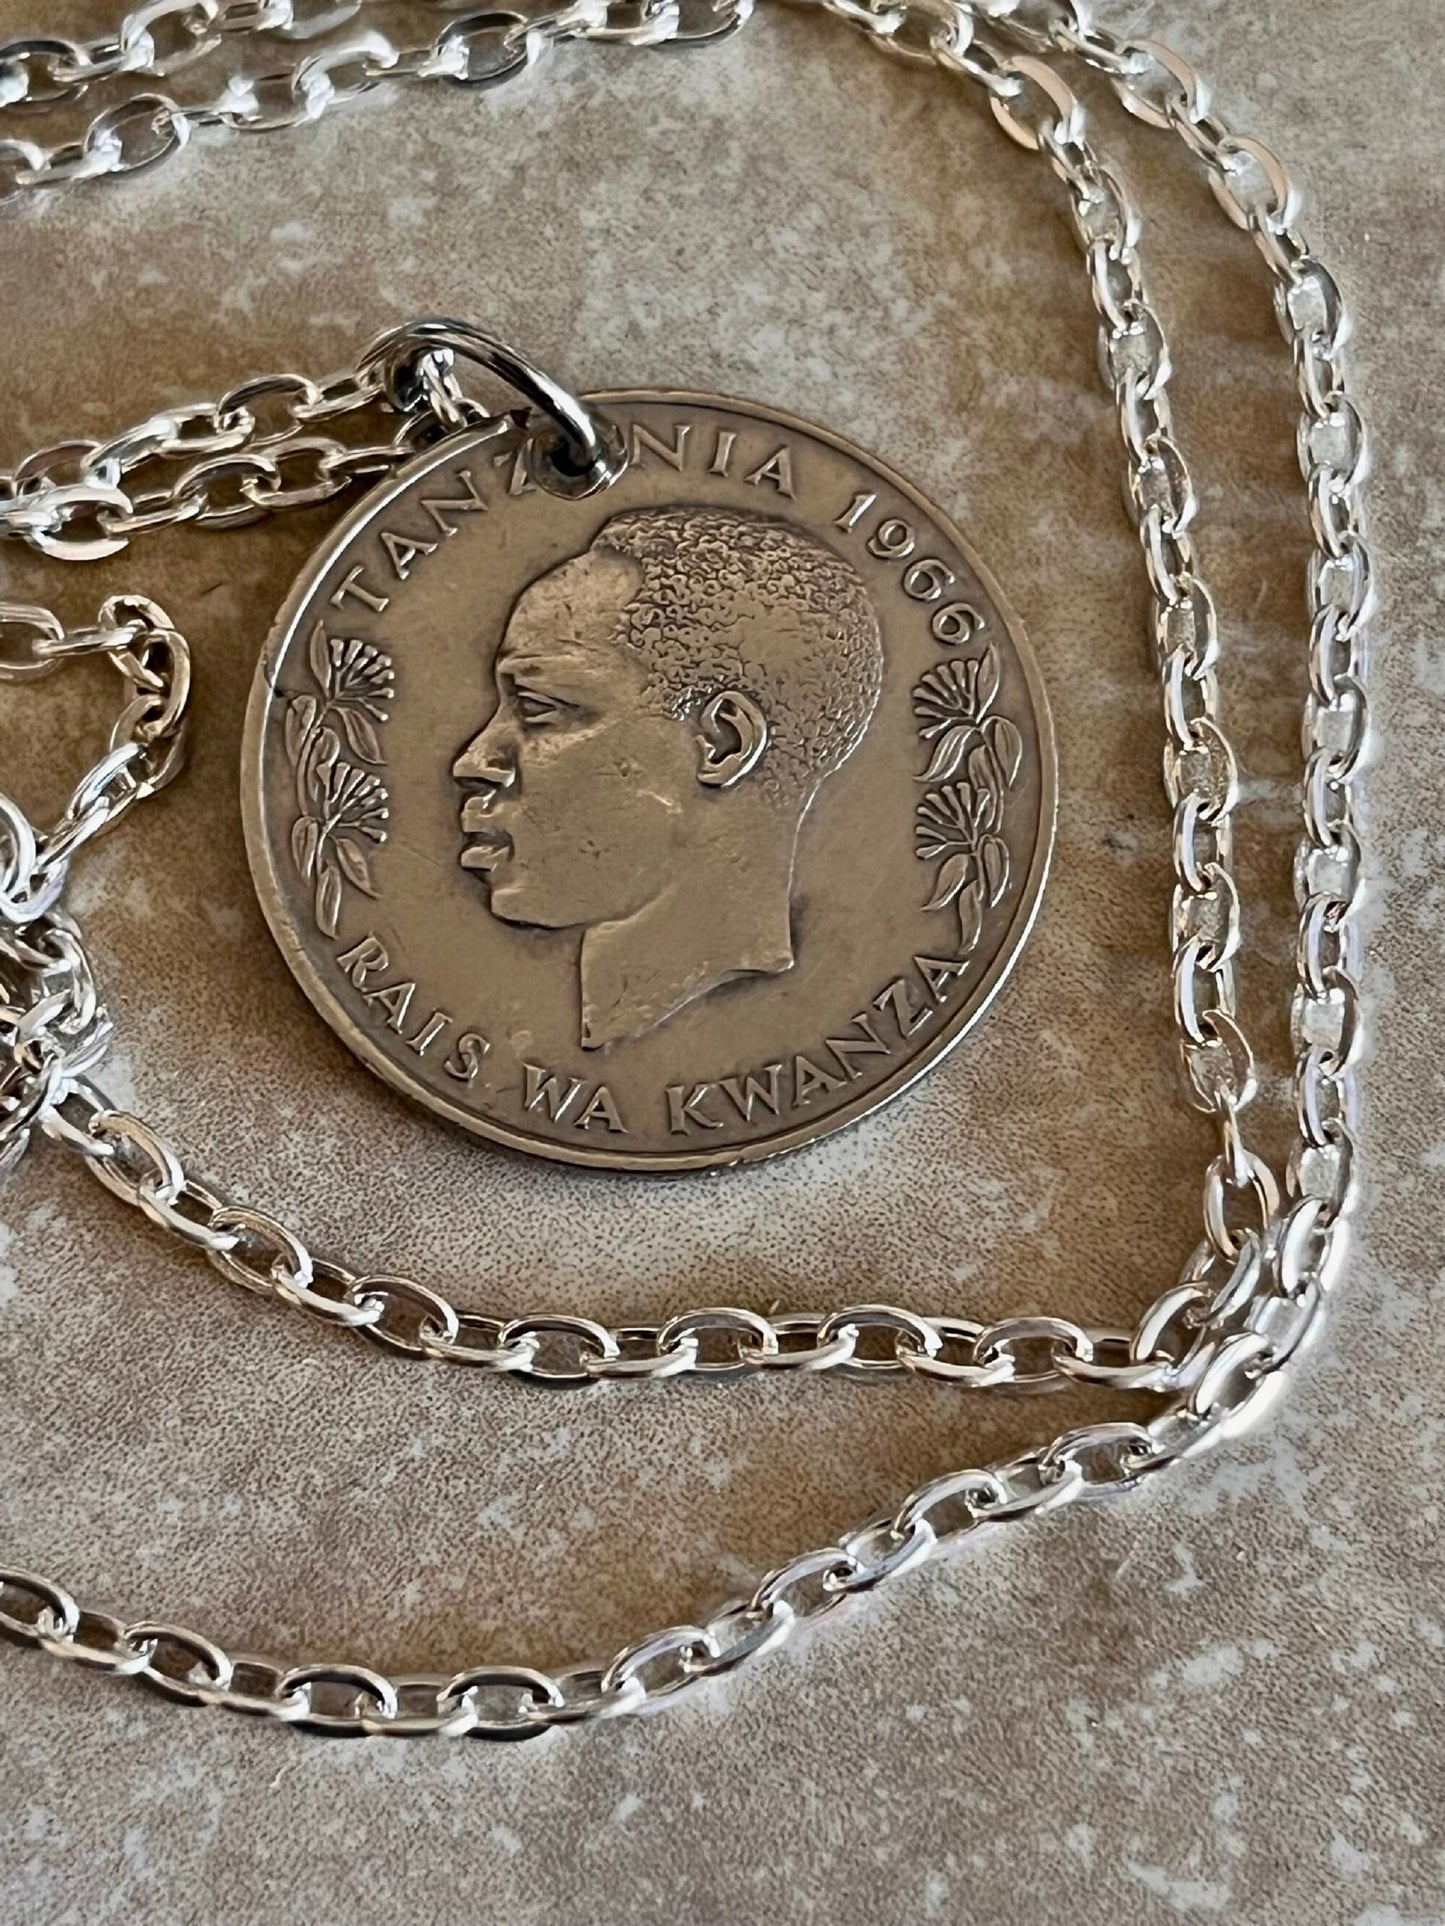 Tanzania 1 Shilling Moja Coin Pendant Necklace Tanzanian Personal Handmade Jewelry Gift Friend Charm For Him Her World Coin Collector